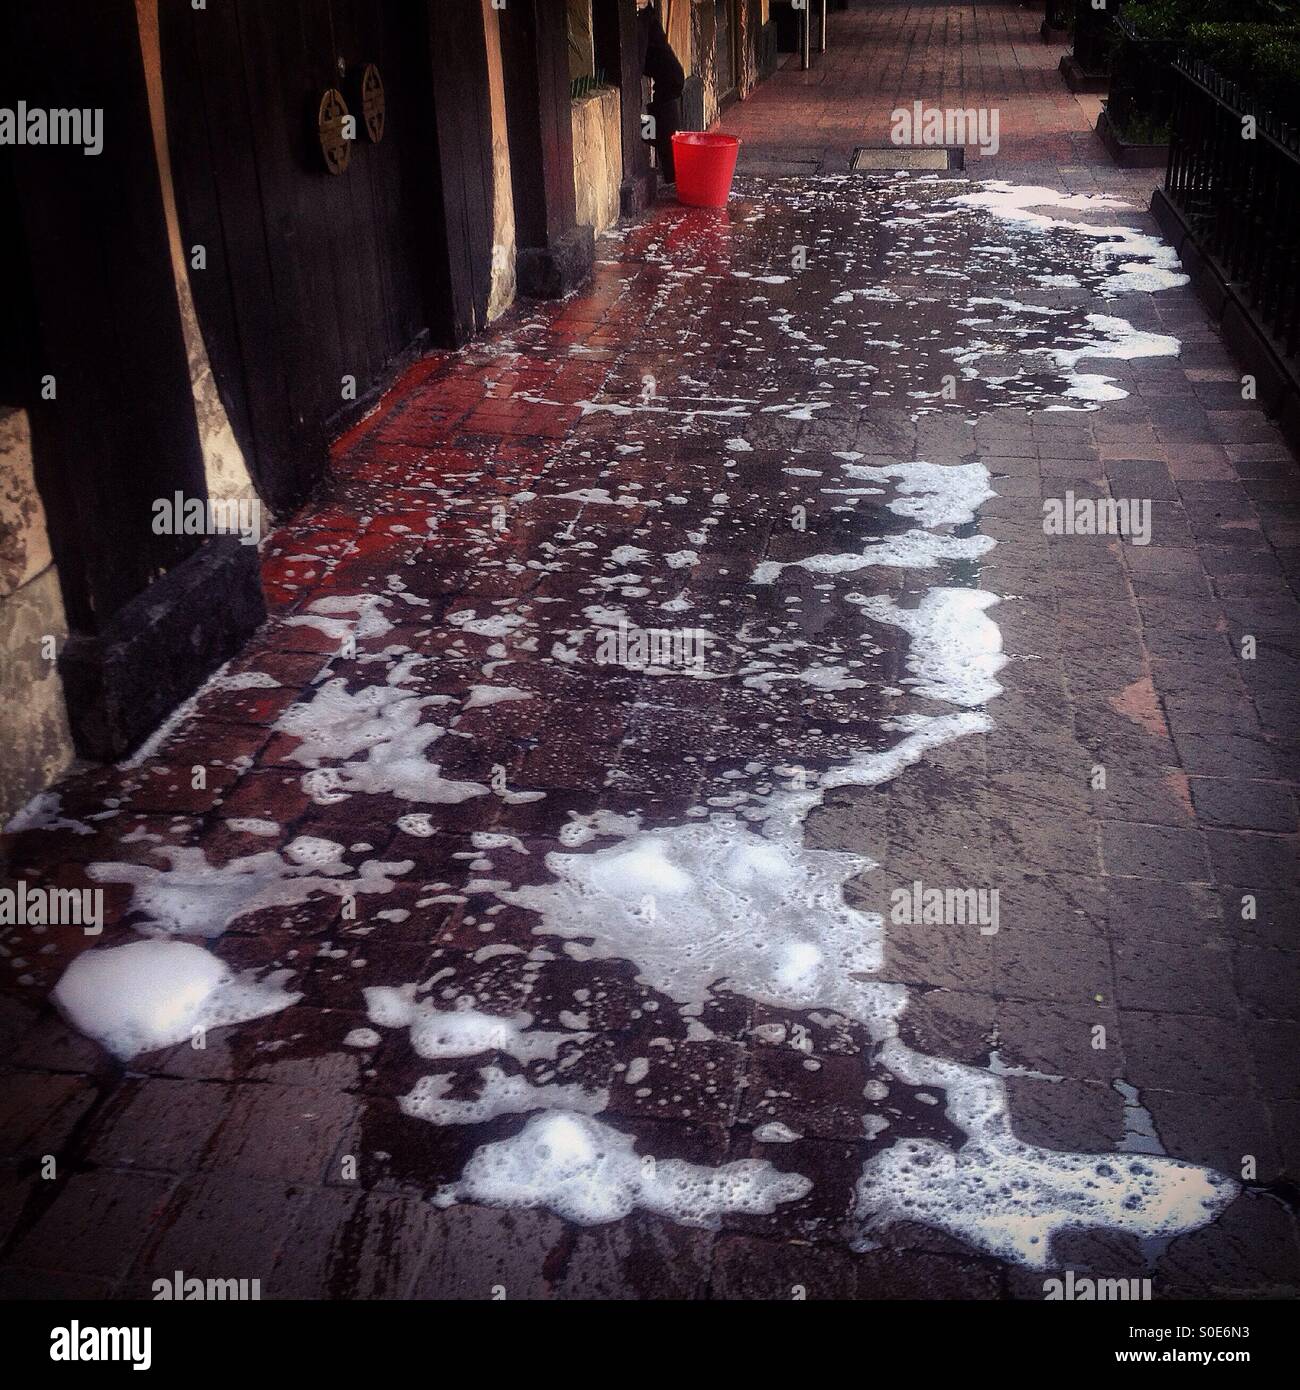 Detergent fills a sidewalk in Zona Rosa neighborhood, Mexico City, Mexico Stock Photo